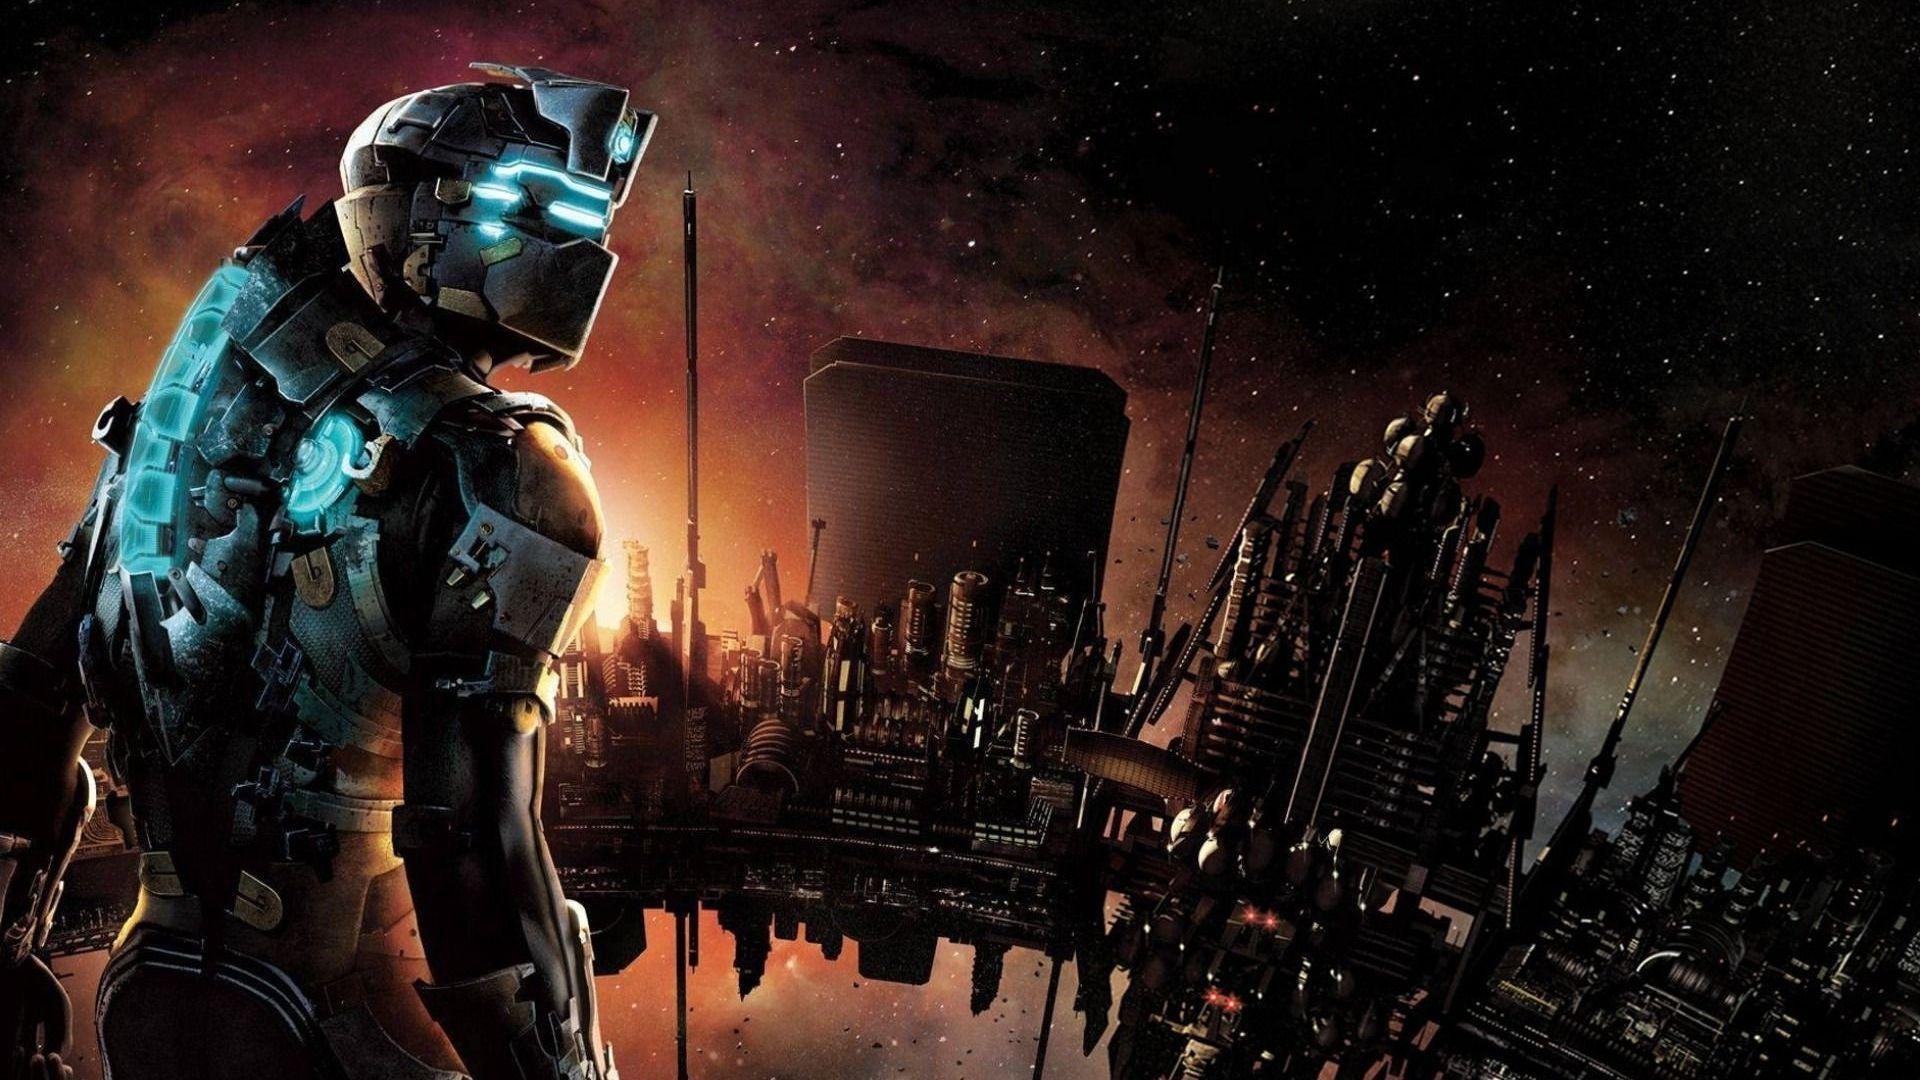 EA is reportedly polling fans on Dead Space 2 & 3 remake interest